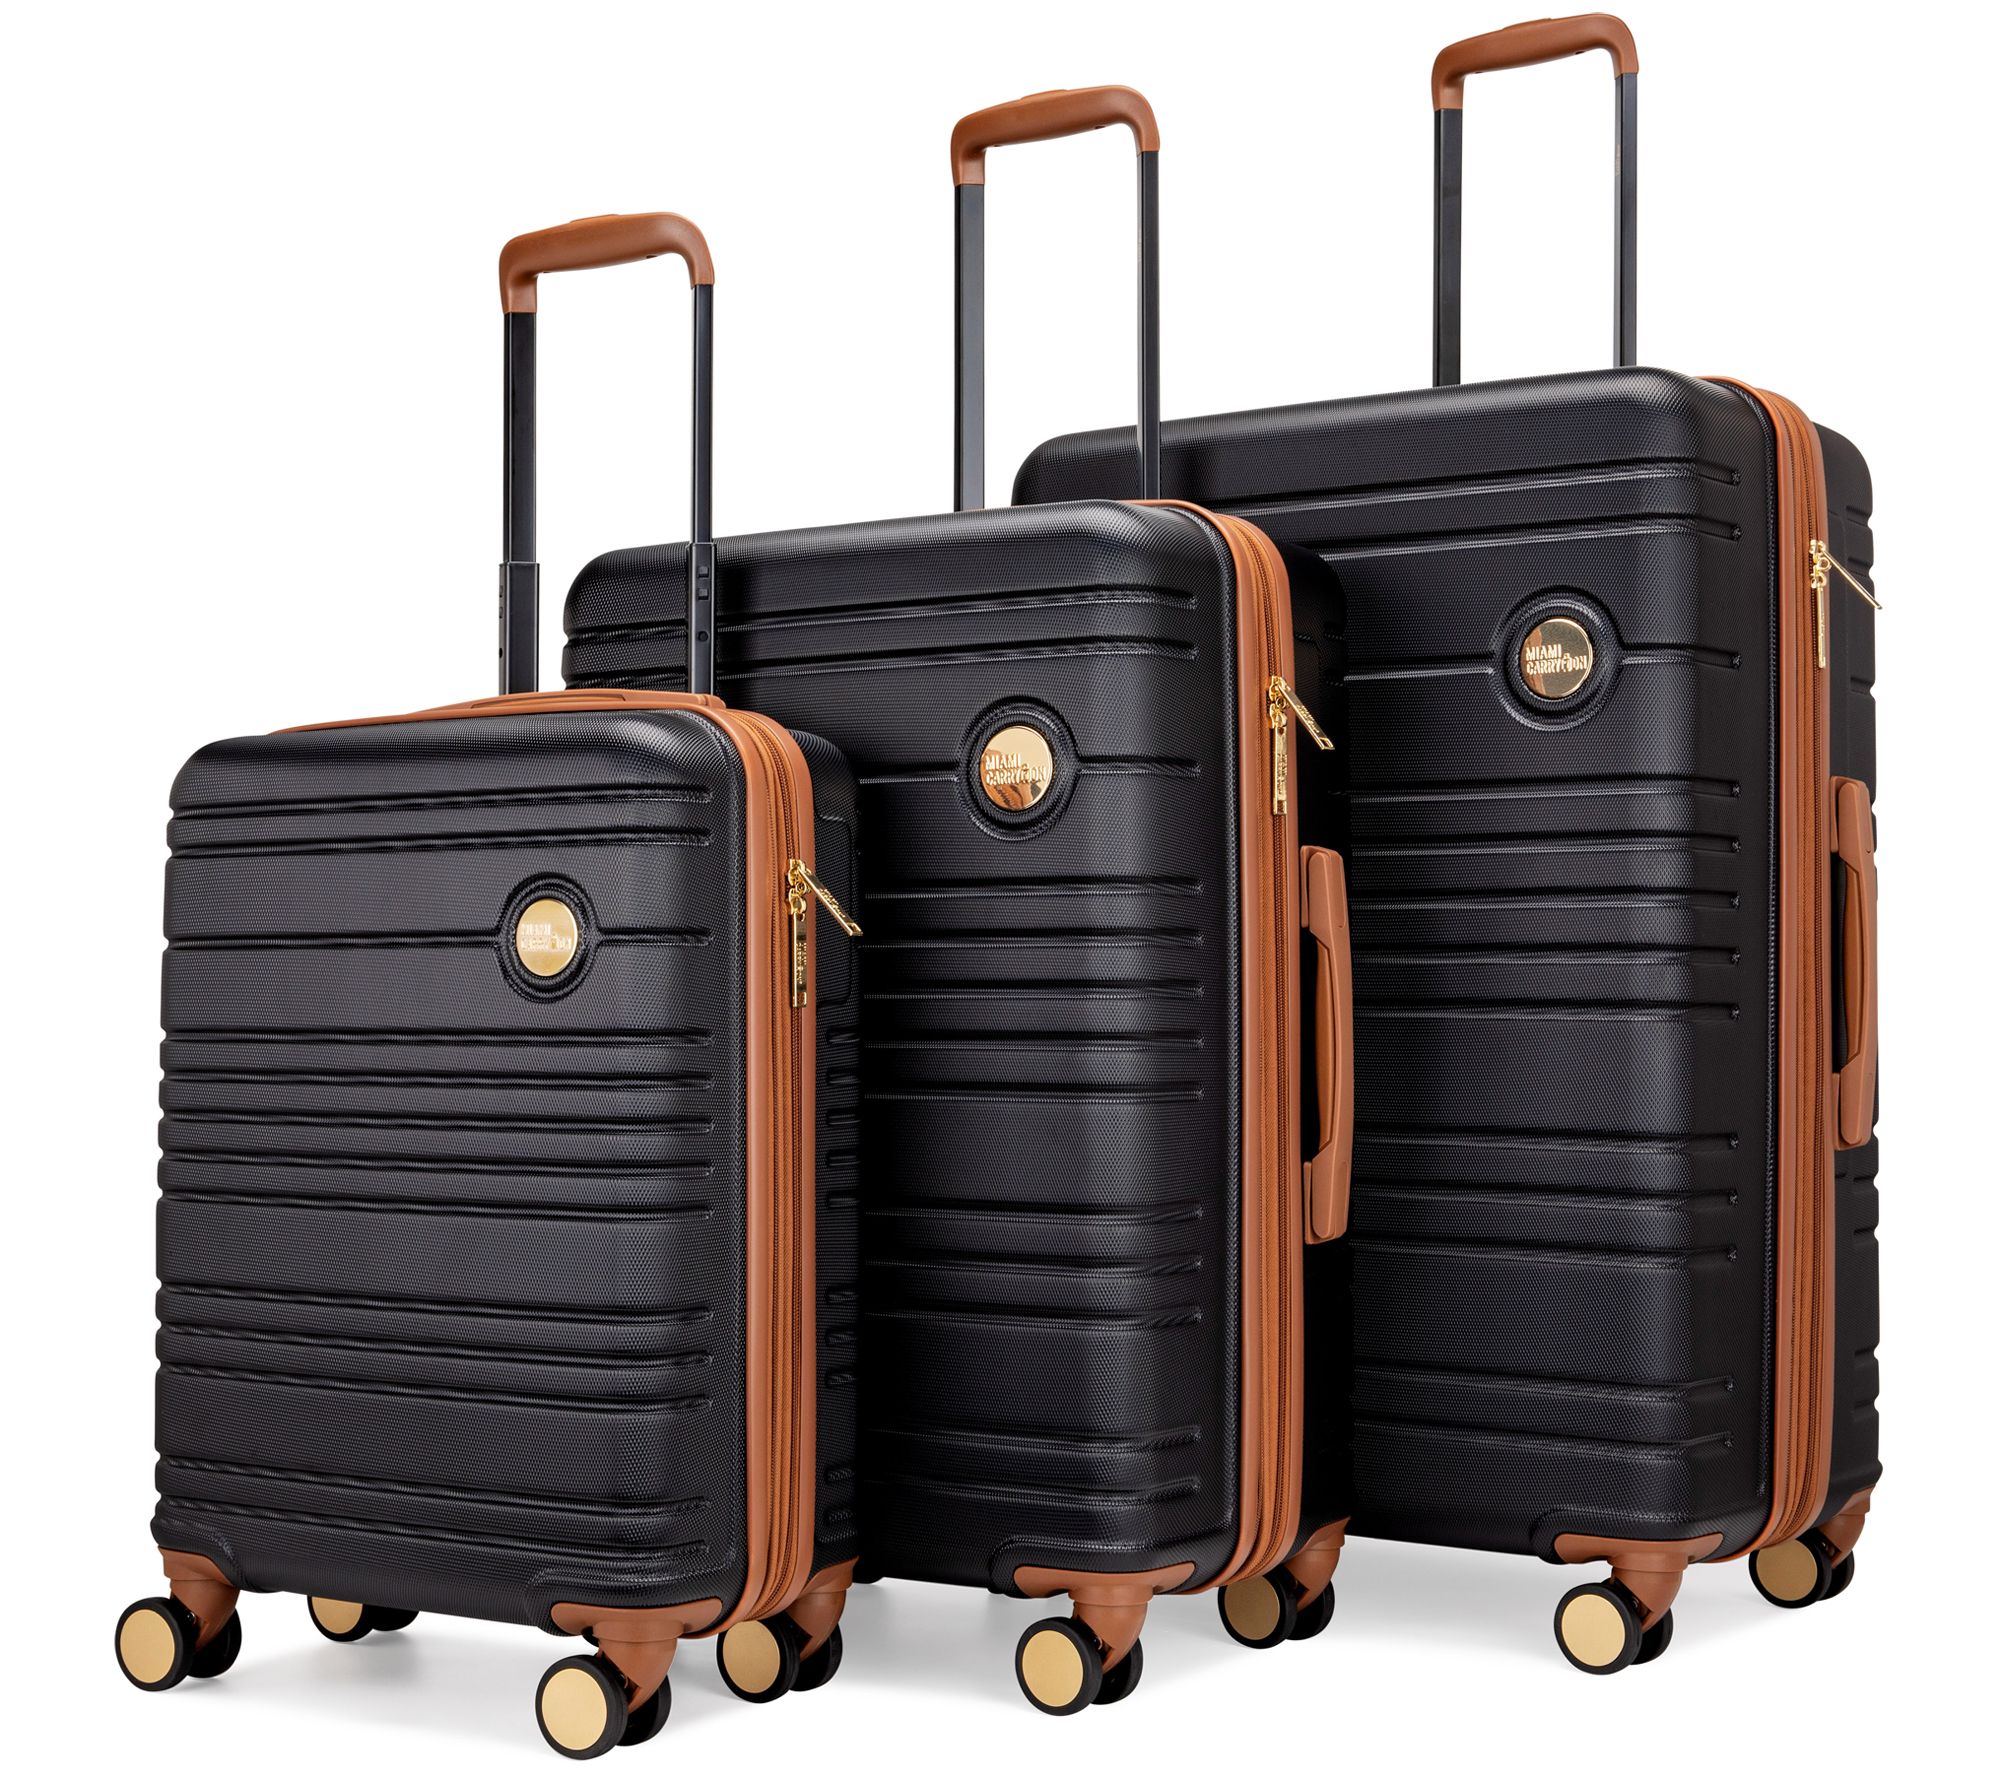 American Flyer Luggage Madrid 5 Piece Spinner Set, Brown, One Size